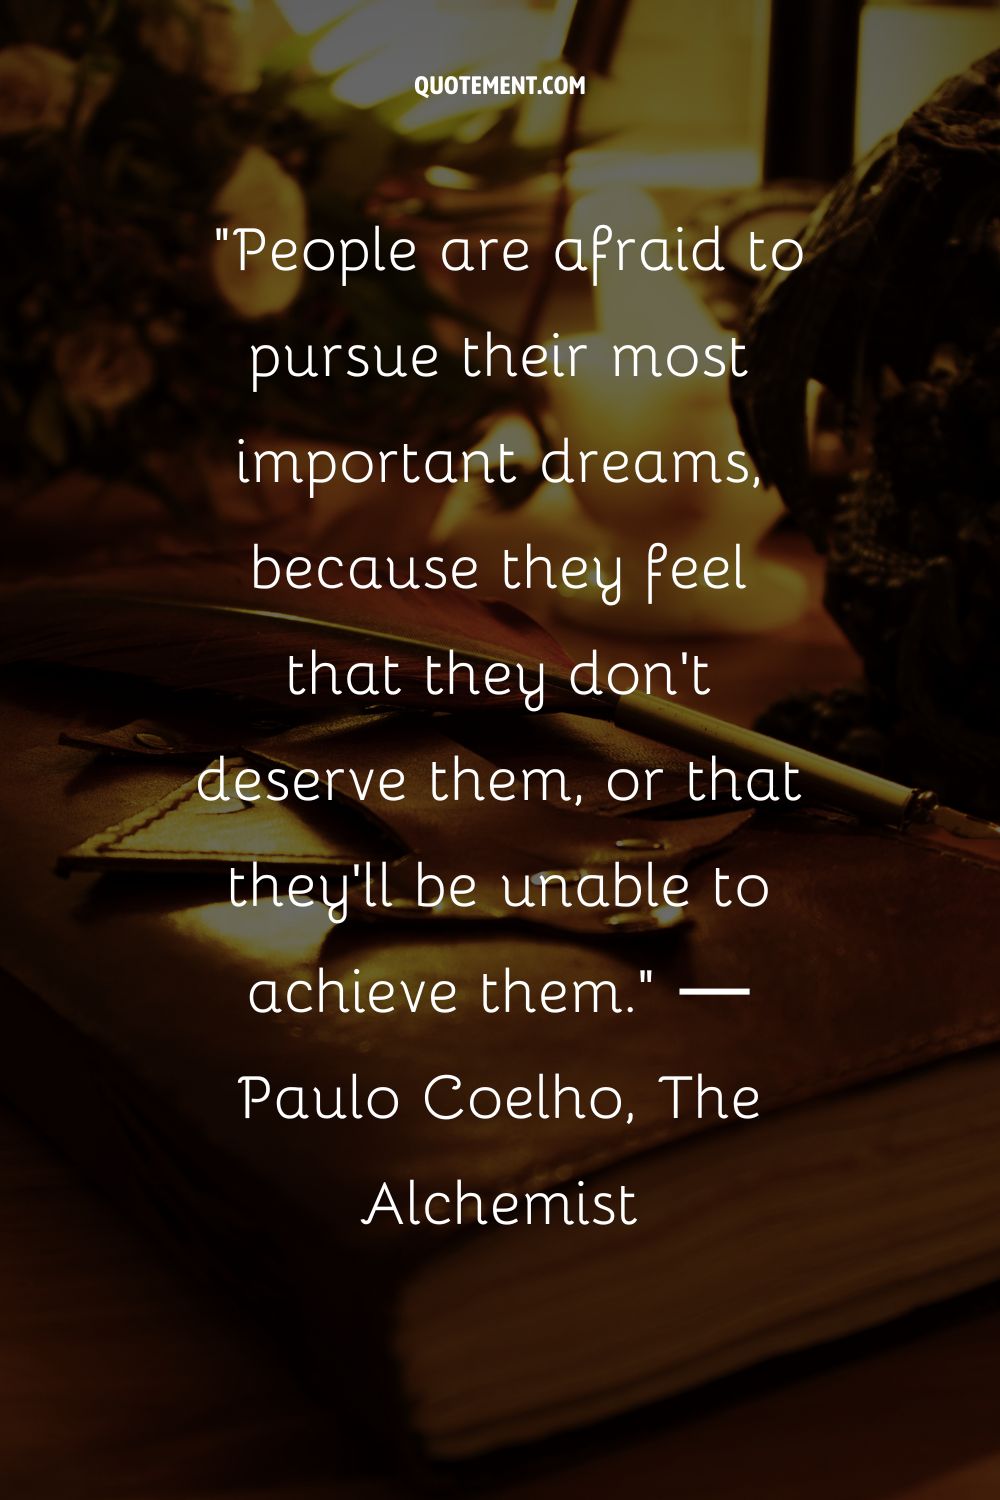 People are afraid to pursue their most important dreams, because they feel that they don't deserve them, or that they'll be unable to achieve them